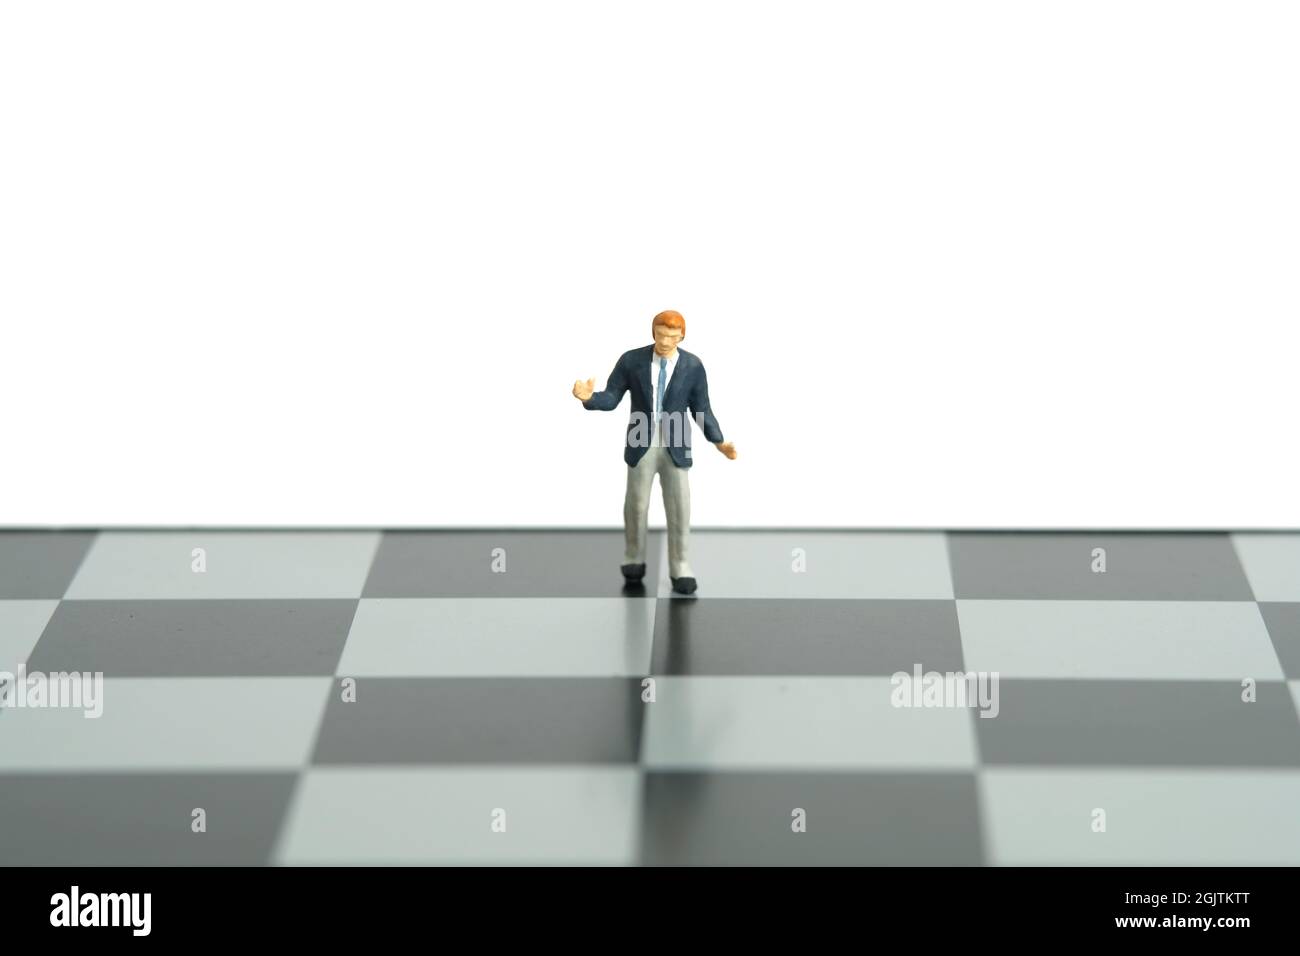 Miniature people toy figure photography. Strategy decision concept. A shrugging unsure businessman stand above chessboard. Isolated on white backgroun Stock Photo